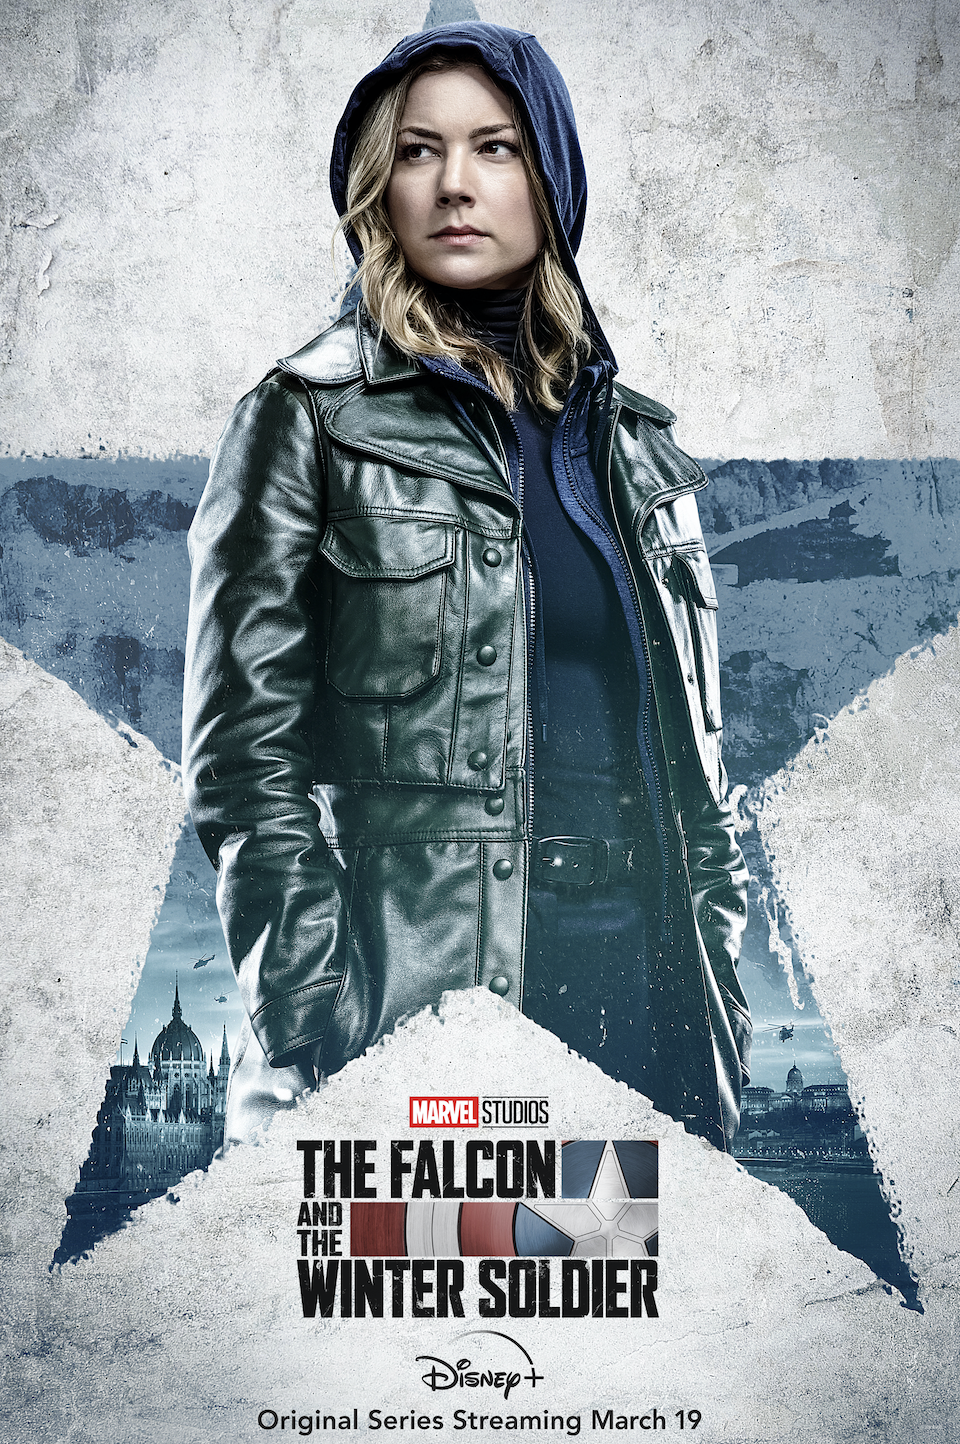 All new Falcon & the Winter Soldier Posters